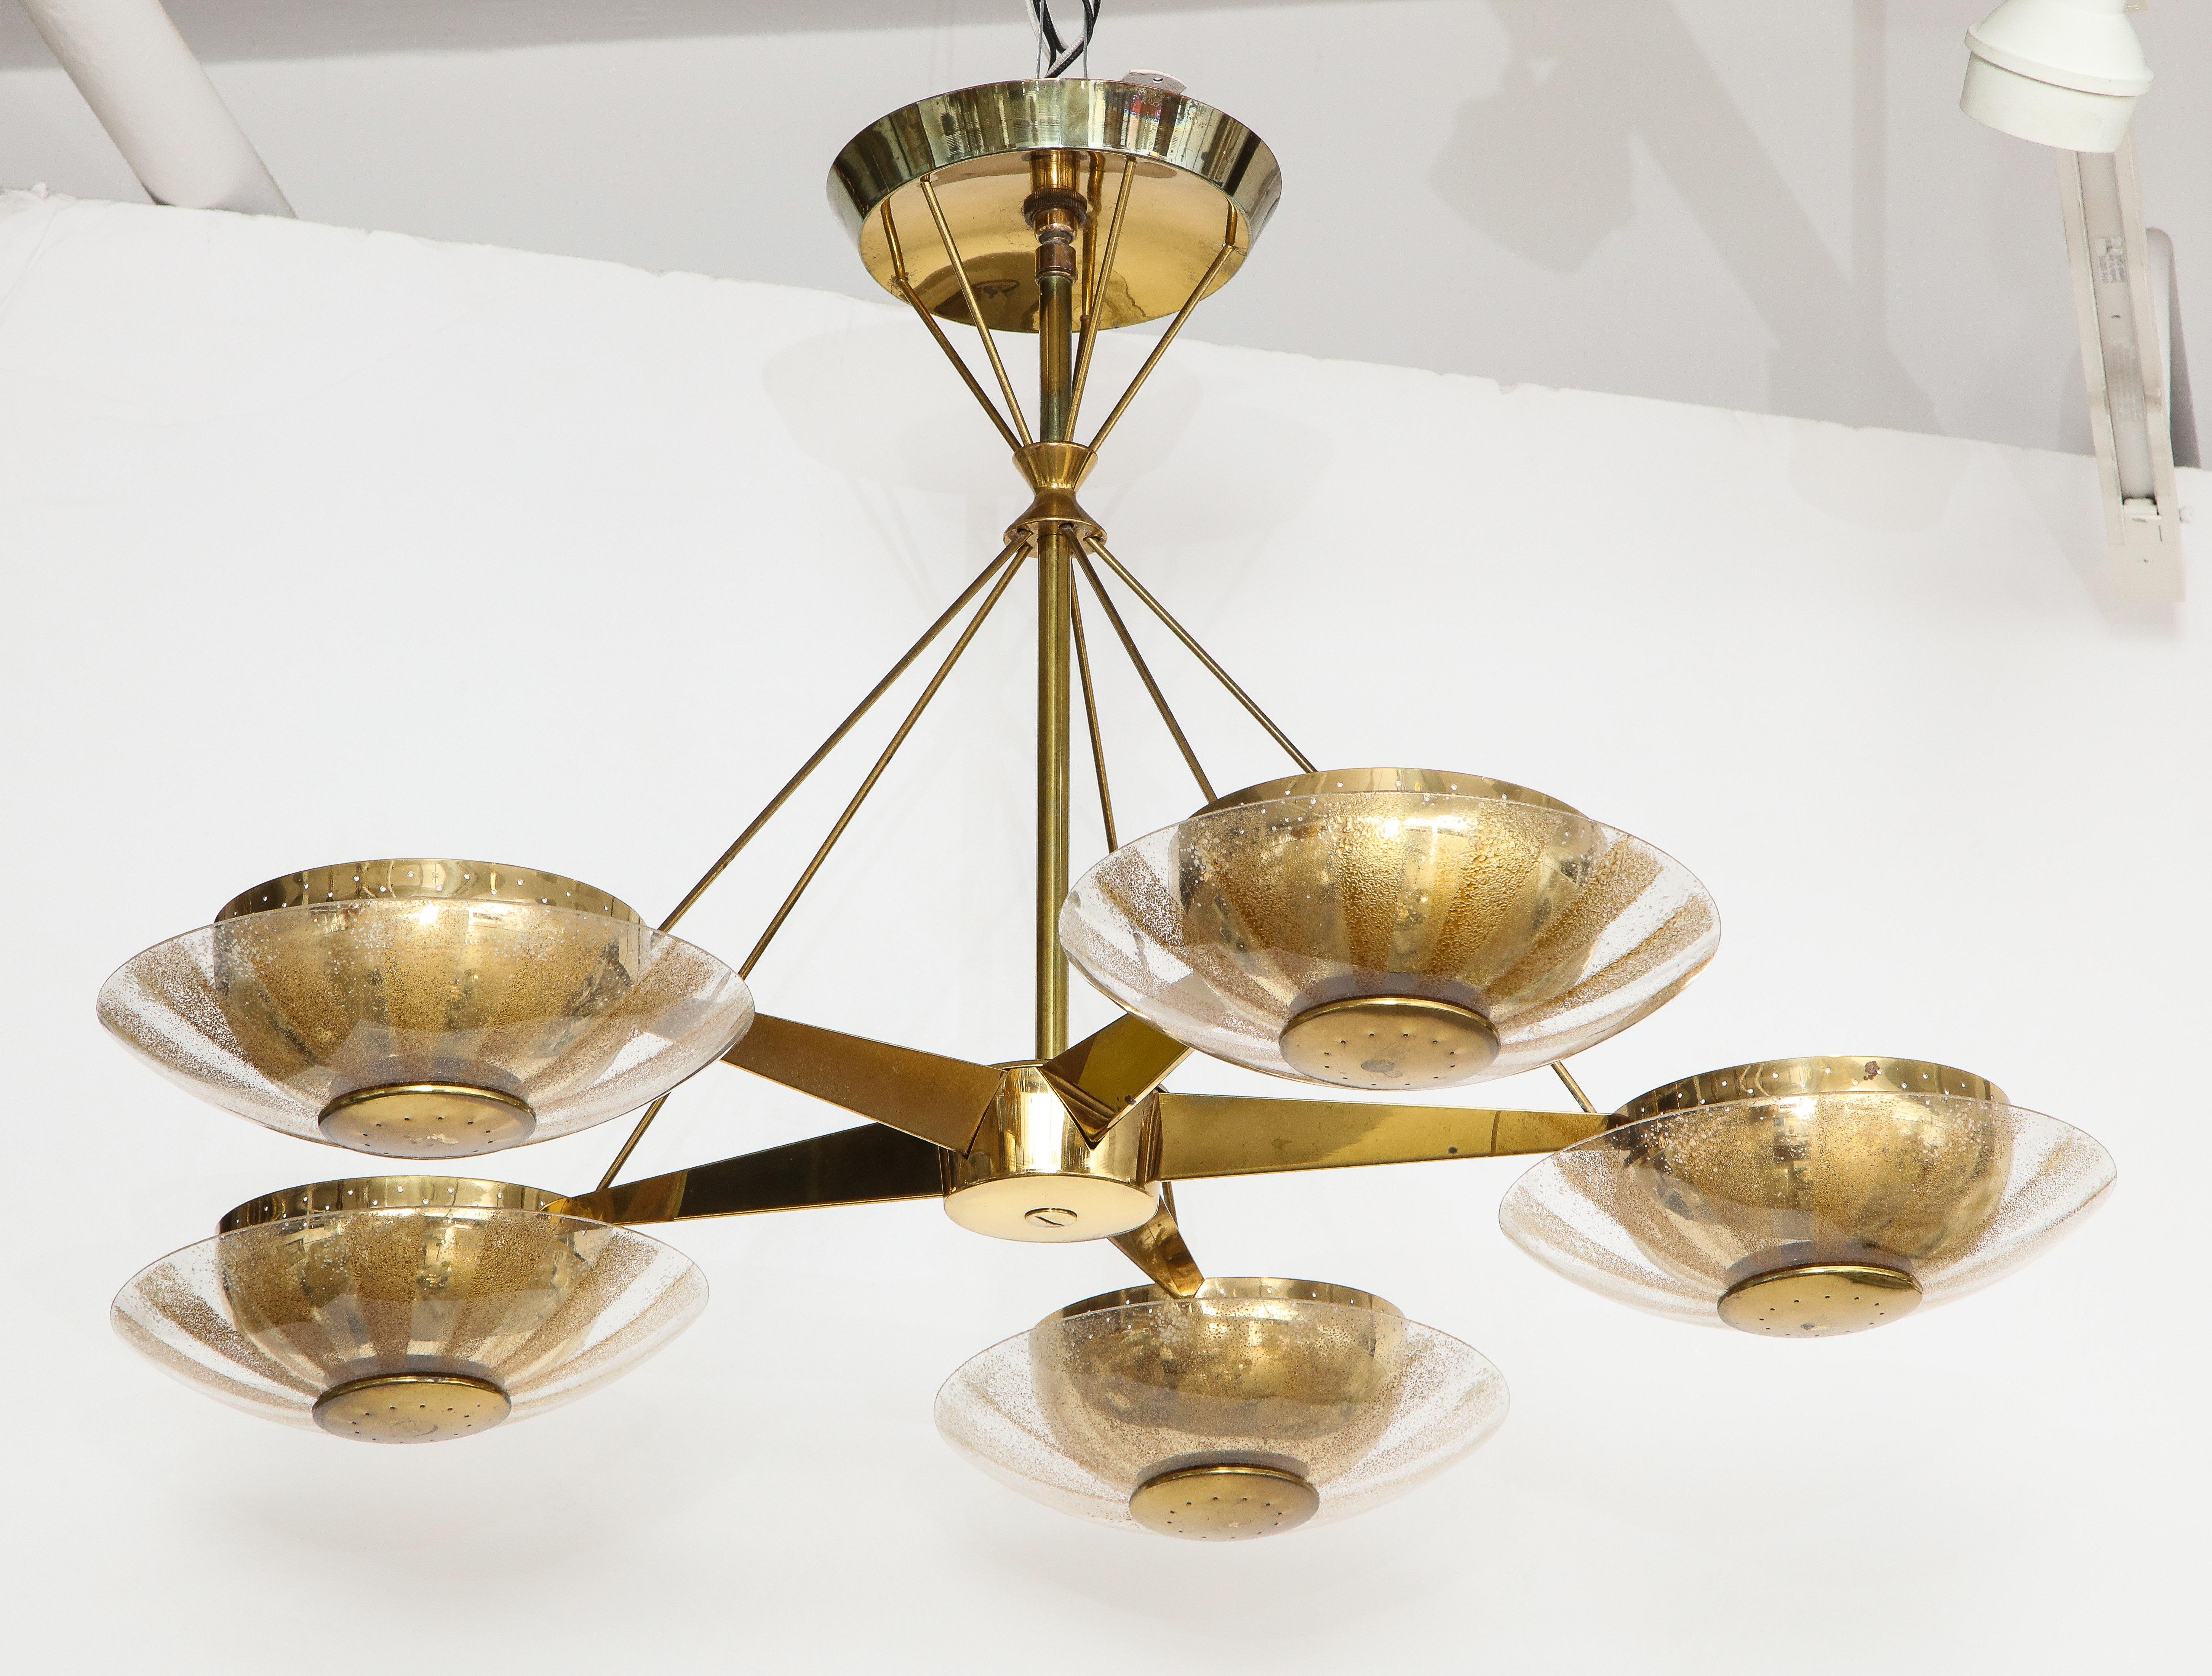 Stunning 1950s Gerald Thurston designed for Lightolier brass and glass 5-arm chandelier, in vintage original condition with beautiful patina. Newly rewired and ready to use.